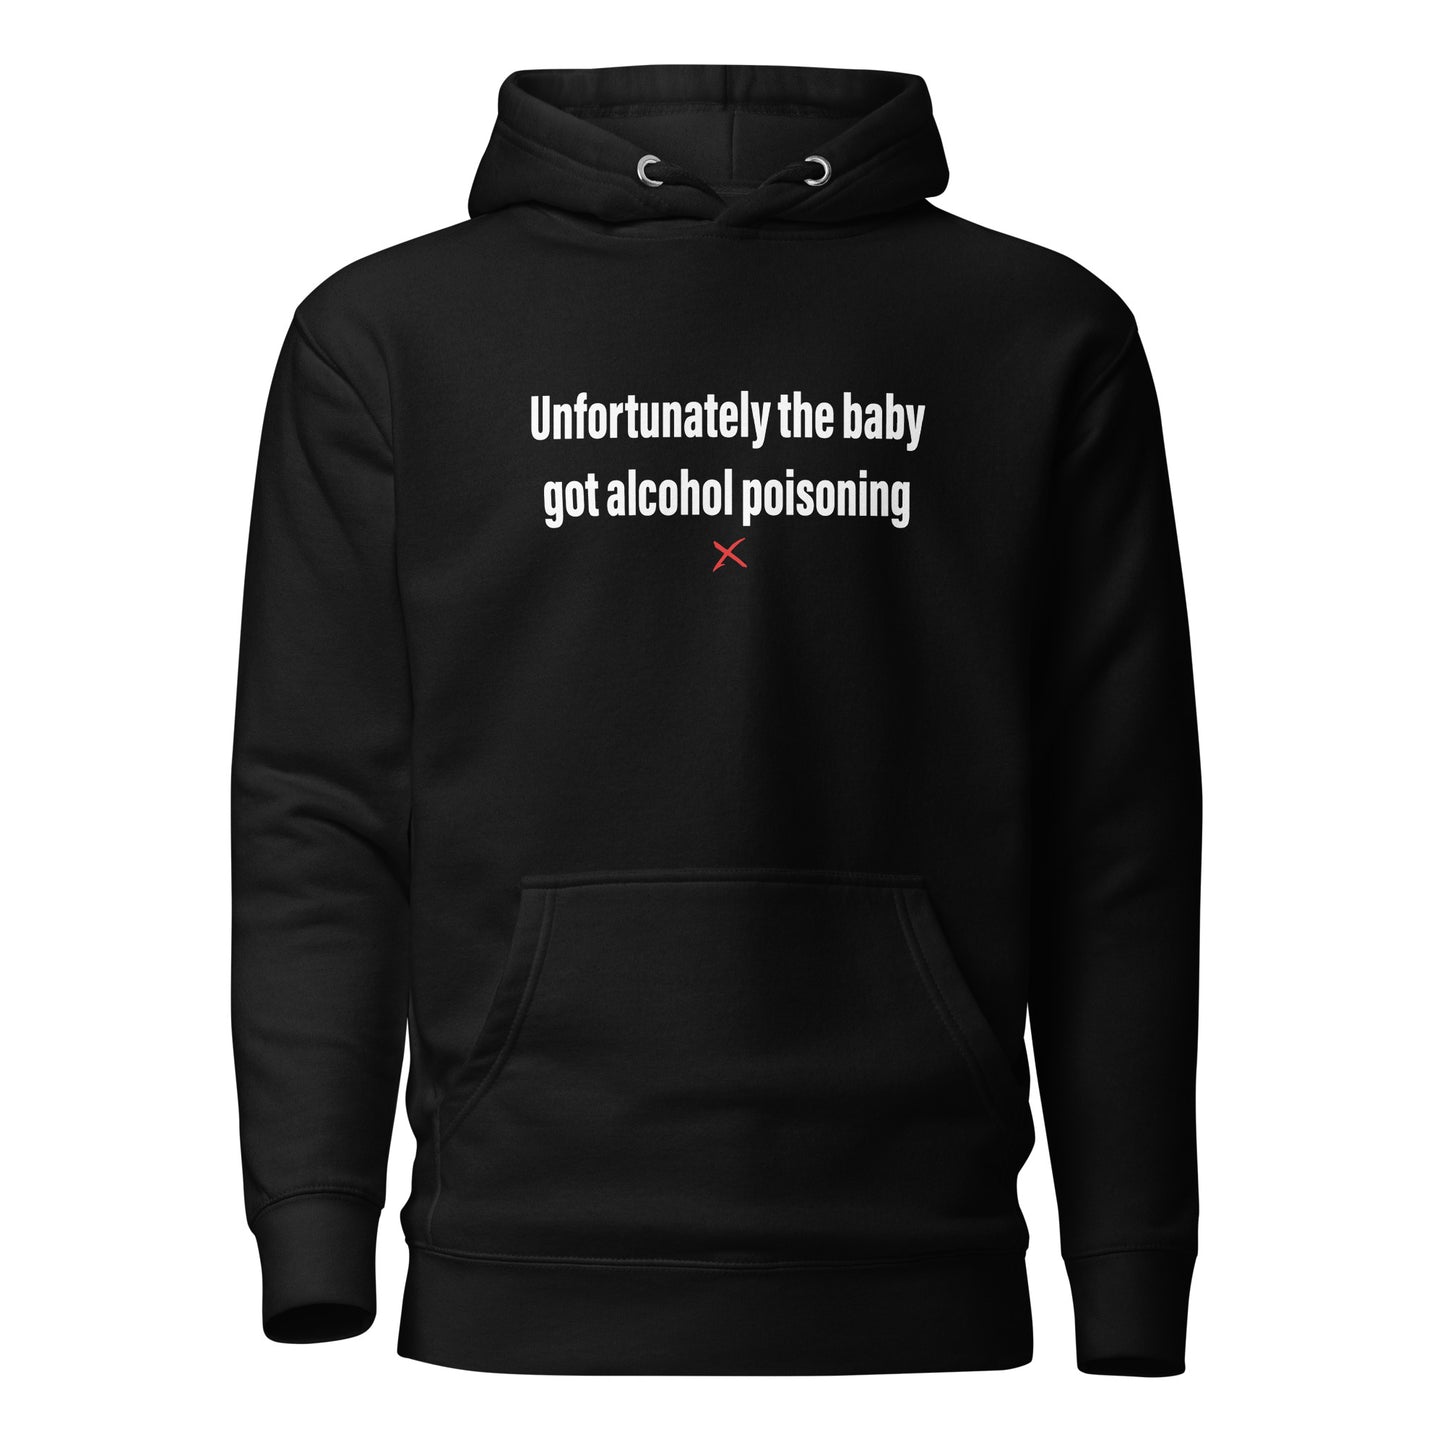 Unfortunately the baby got alcohol poisoning - Hoodie